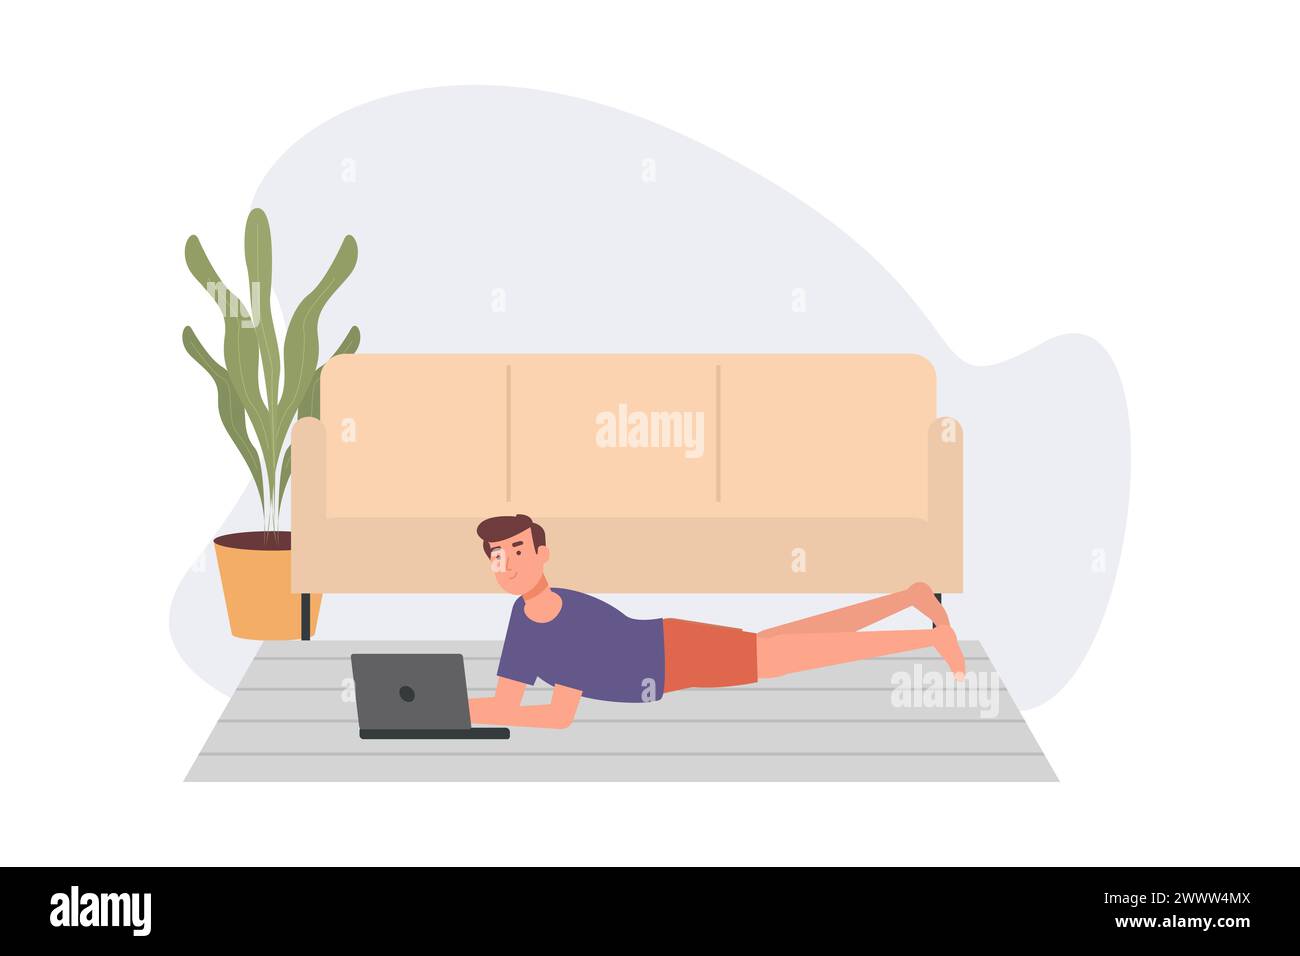 Work from Home Set Vector Illustration, Online Meeting Set Concept Flat Design, Freelancer Work at Home Template Illustrazione Vettoriale